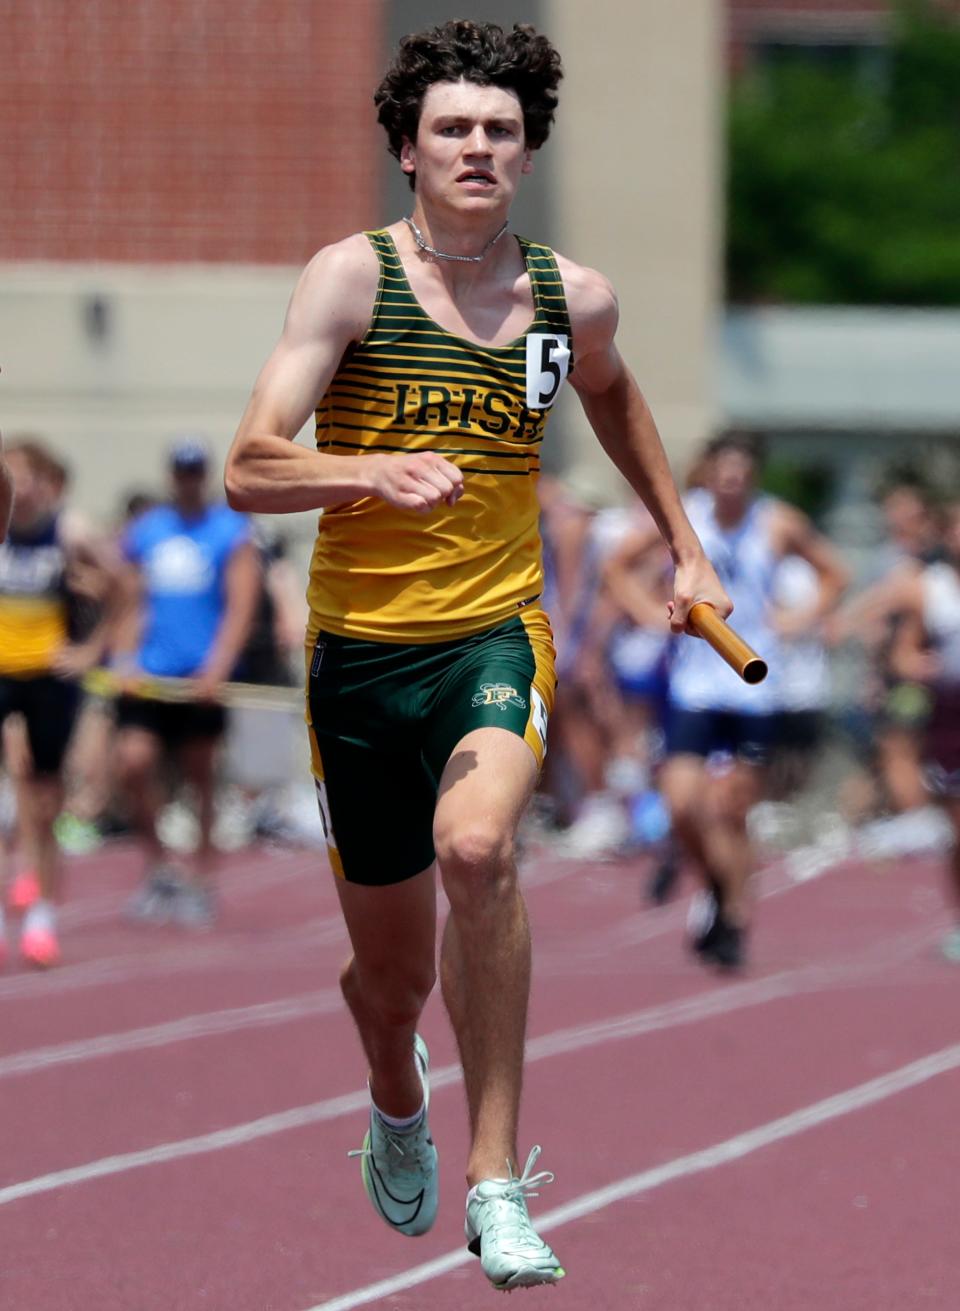 Freedom's Gavin Greiner ran the anchor leg of his team's 400-meter relay team that finished sixth in Division 2 at the WIAA state track and field meet.